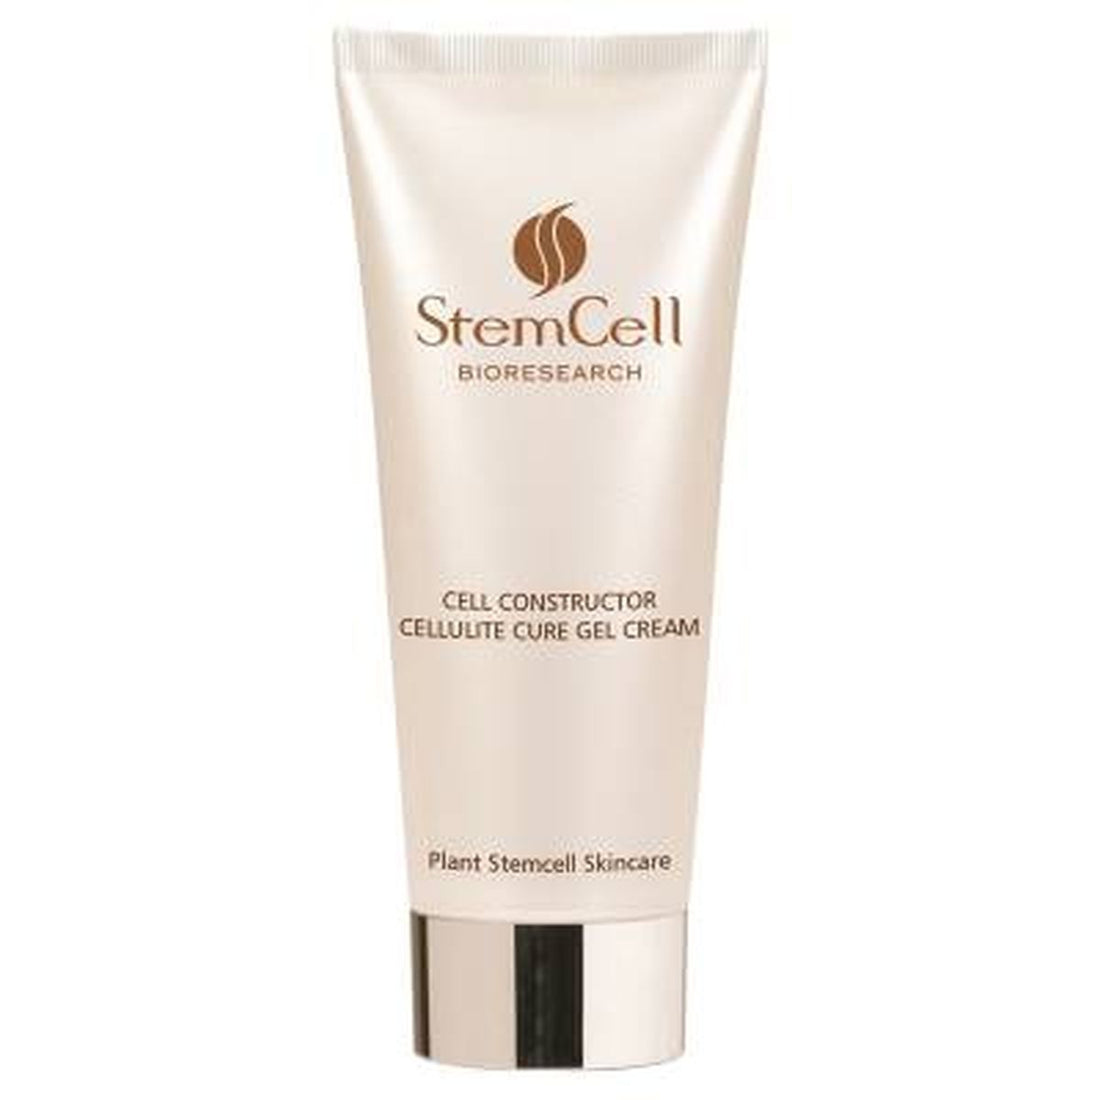 Stemcell Cell Constructor Anti-cellulite healing gel Cream 200ml